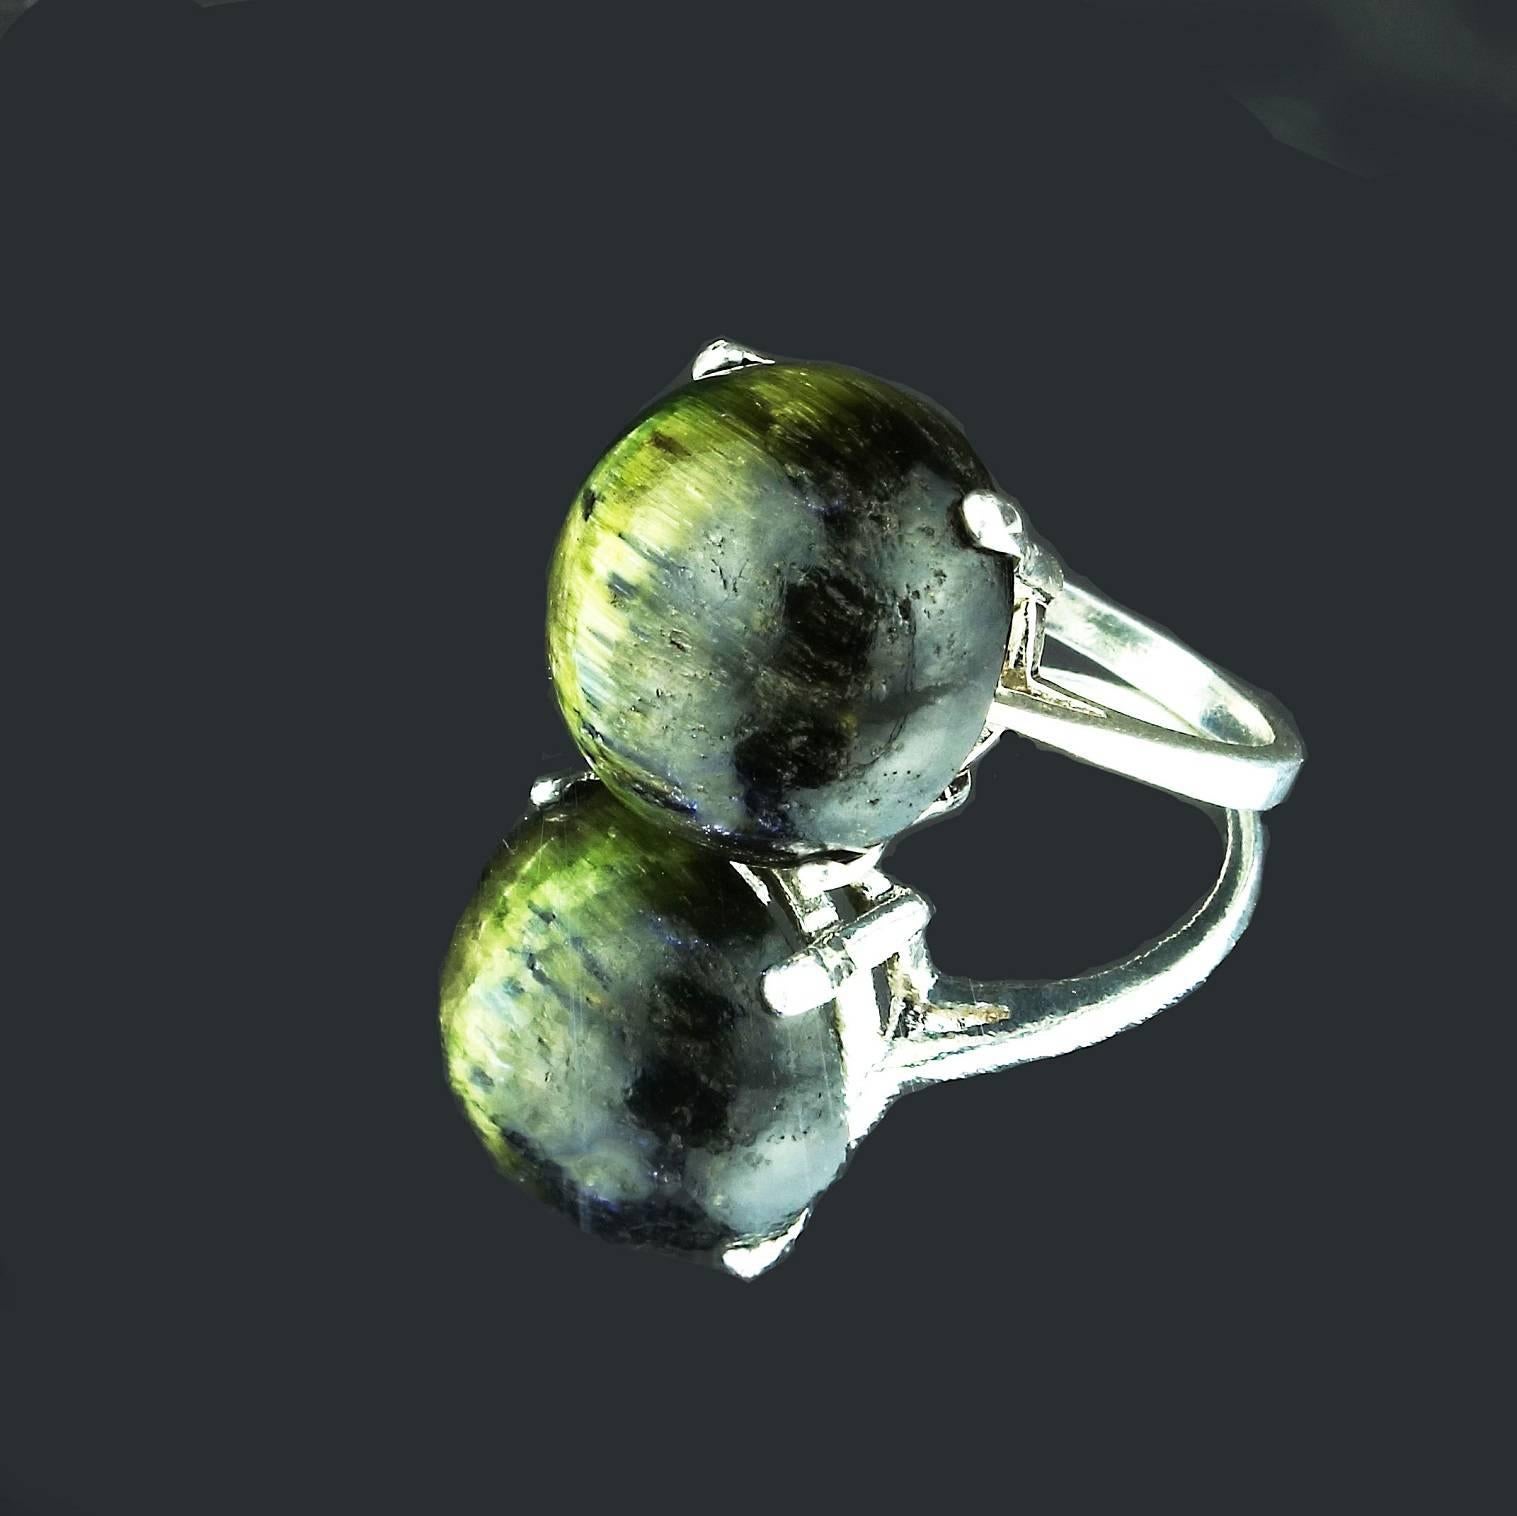 Custom made glorious, big, ring of 20.81 carats of green Chrome Diopside Cat's Eye to follow you around.  This is a great round cabochon dome seated in Sterling Silver. The ring is a sizable 6.25.  What a fun, playful everyday into evening ring to